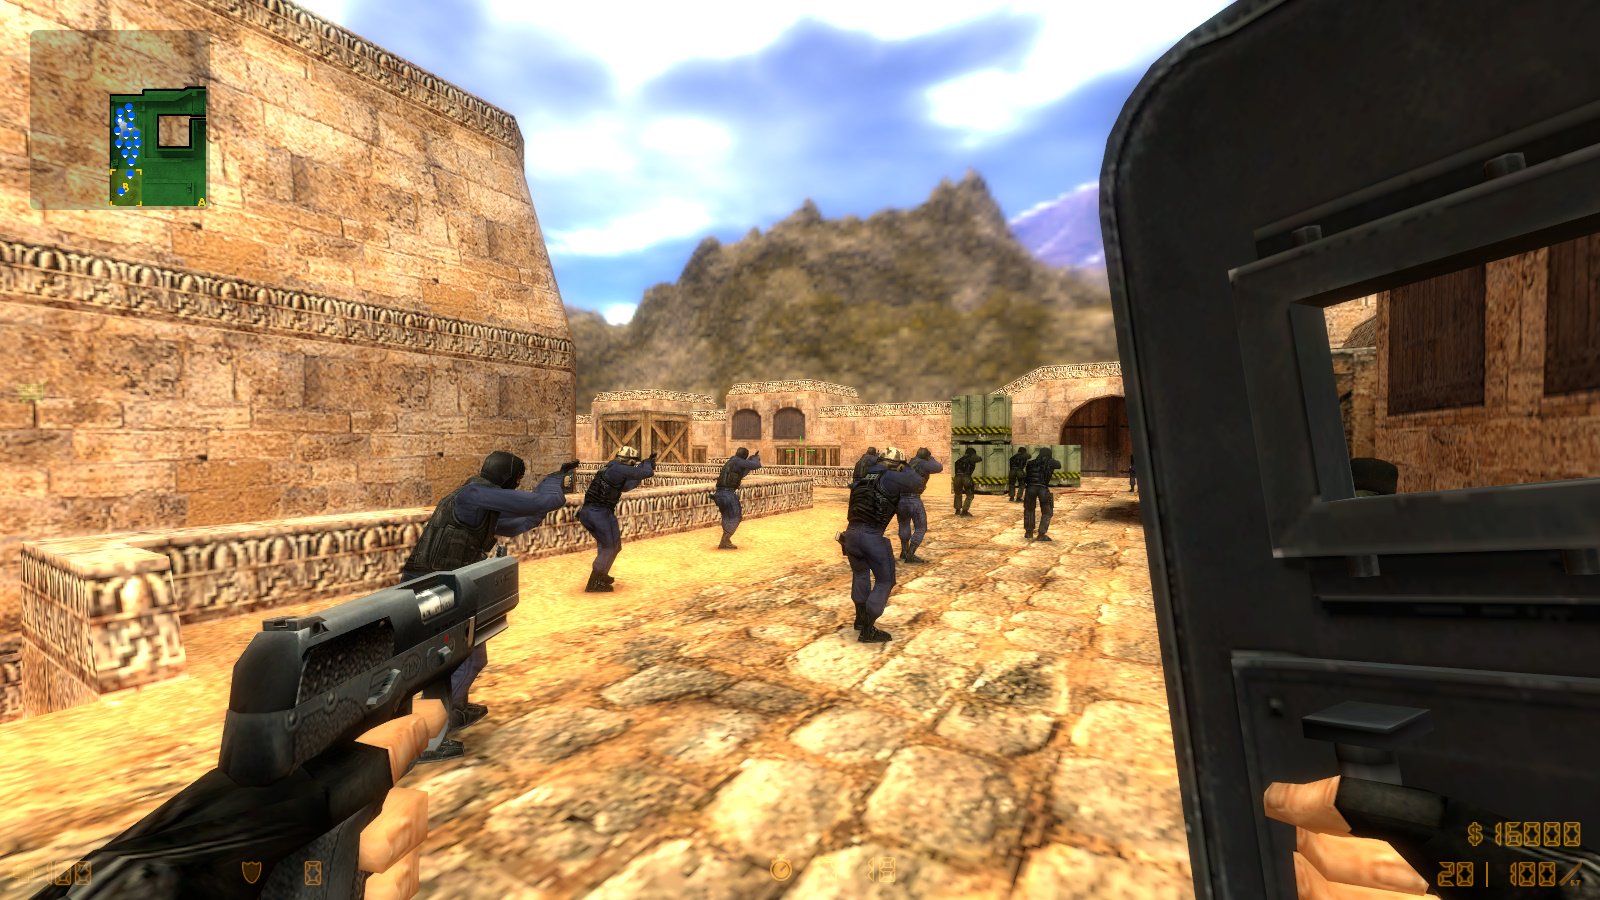 Detail Counter Strike Mod Release Date Nomer 42